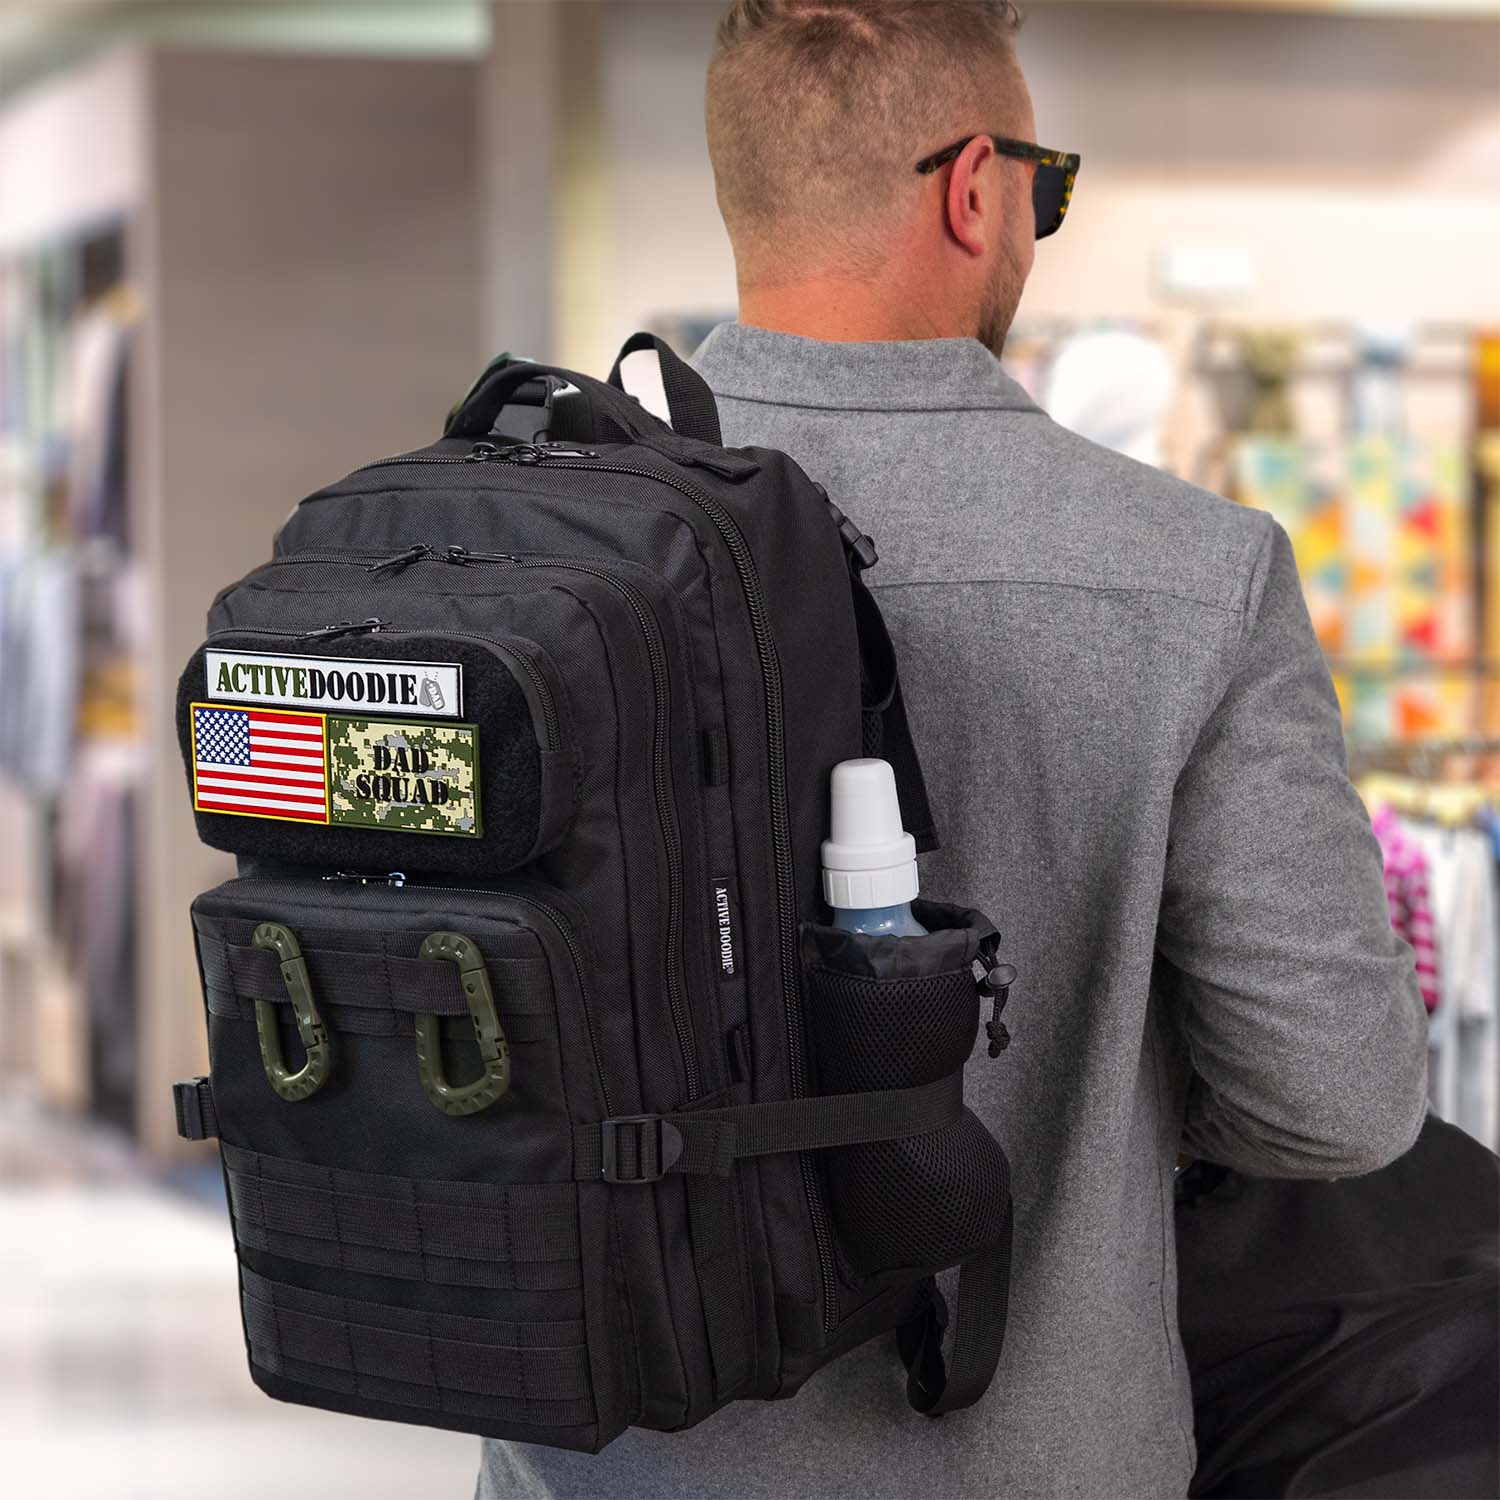 Active Doodie® JUG.30L Dad Diaper Bag Backpack with Green D-Rings and Dad Squad Patches